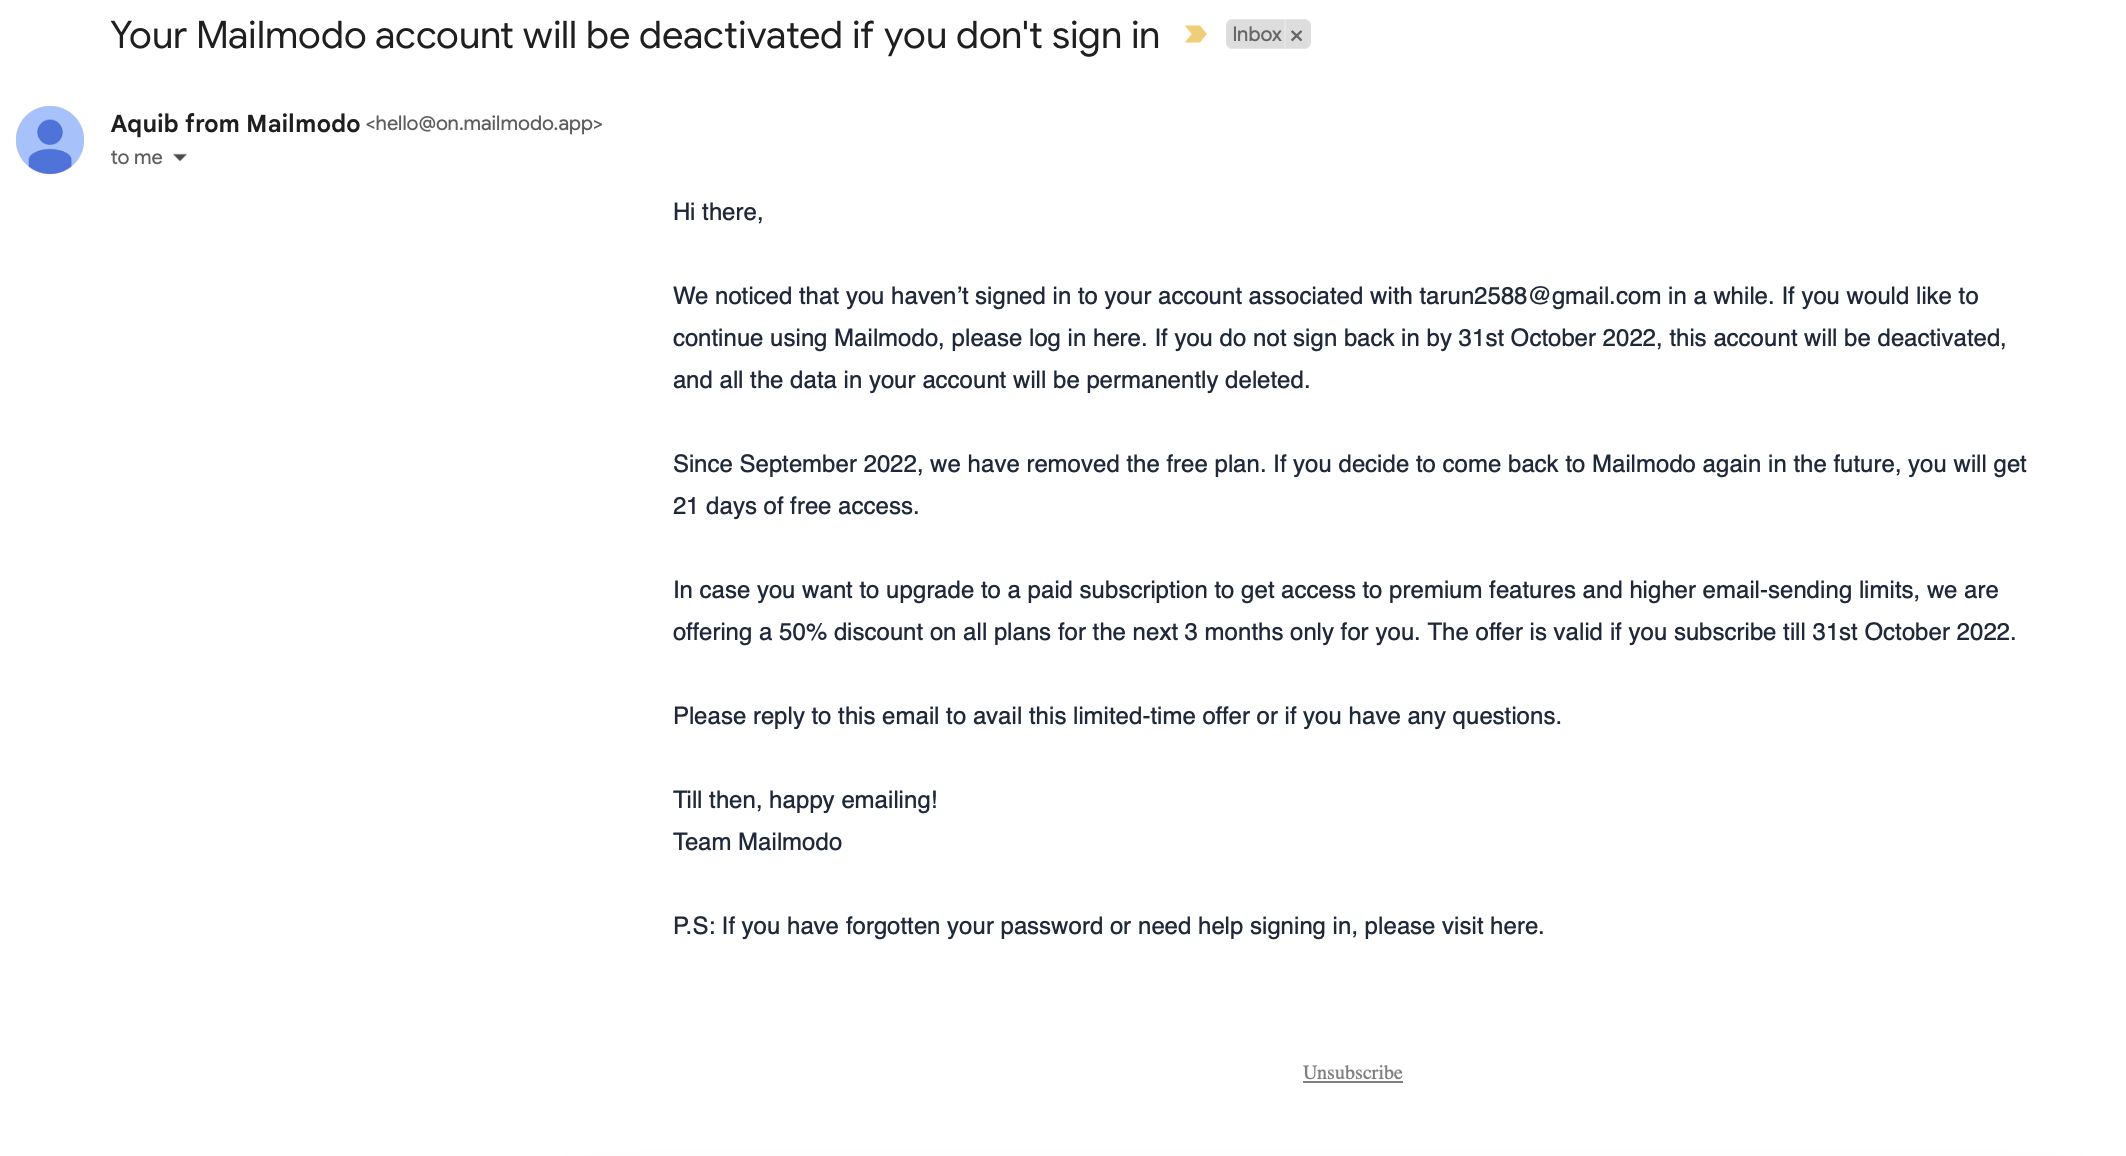 Account Removal Emails: Screenshot of Mailmodo's account deactivation notification email to users